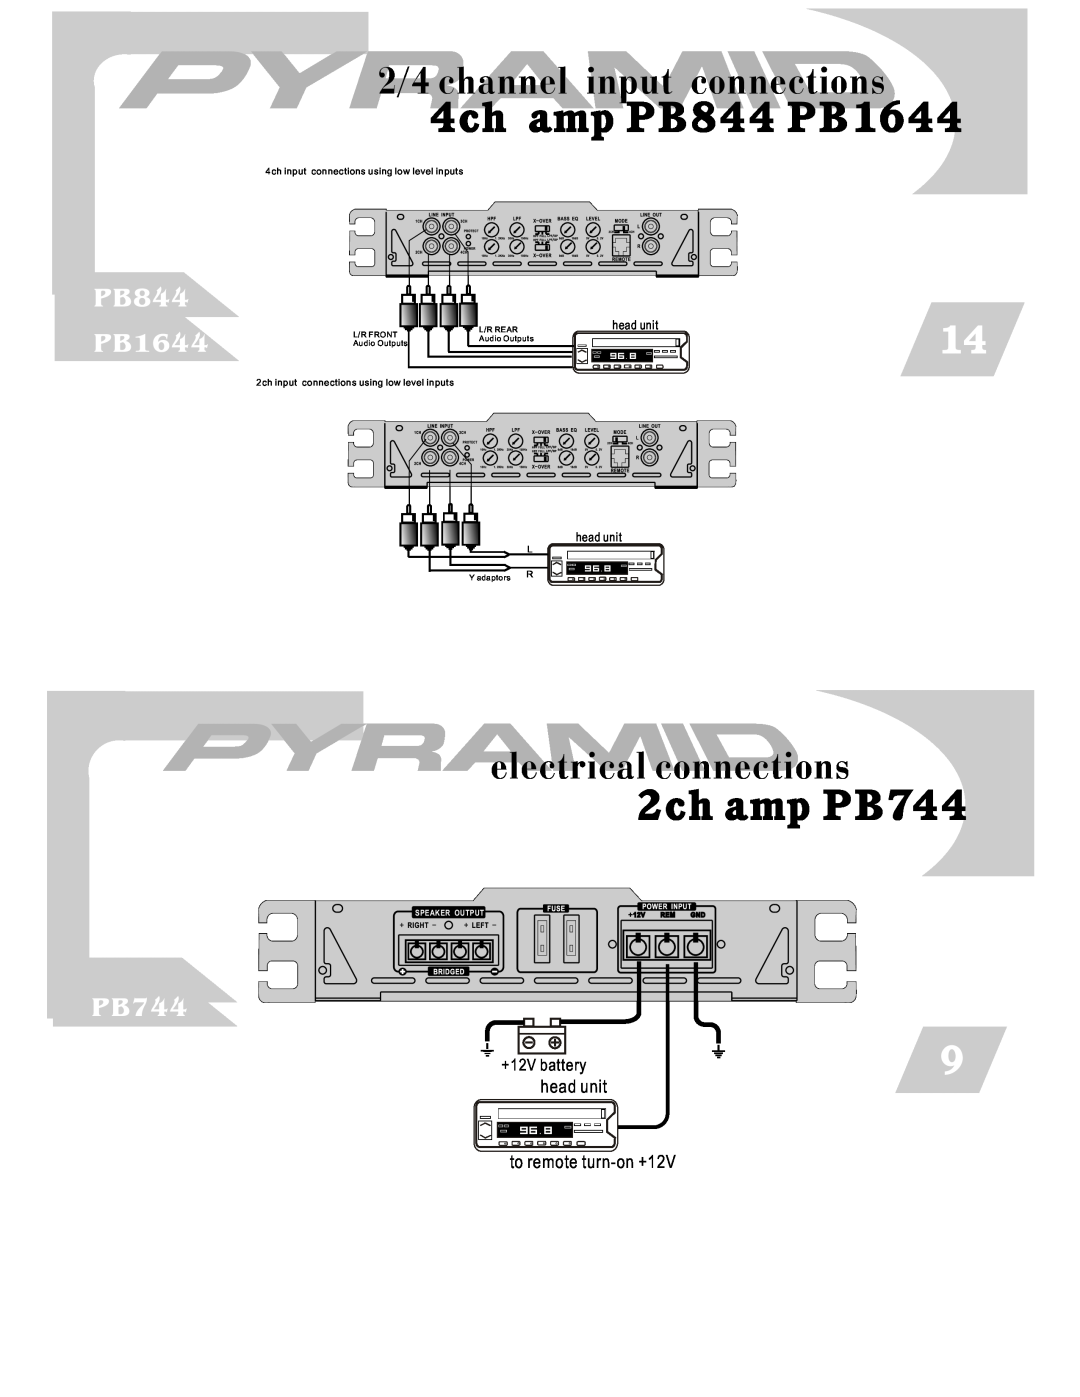 Pyramid Car Audio 2/4 channel input connections, electrical connections, 4ch amp PB844 PB1644, 2ch amp PB744 